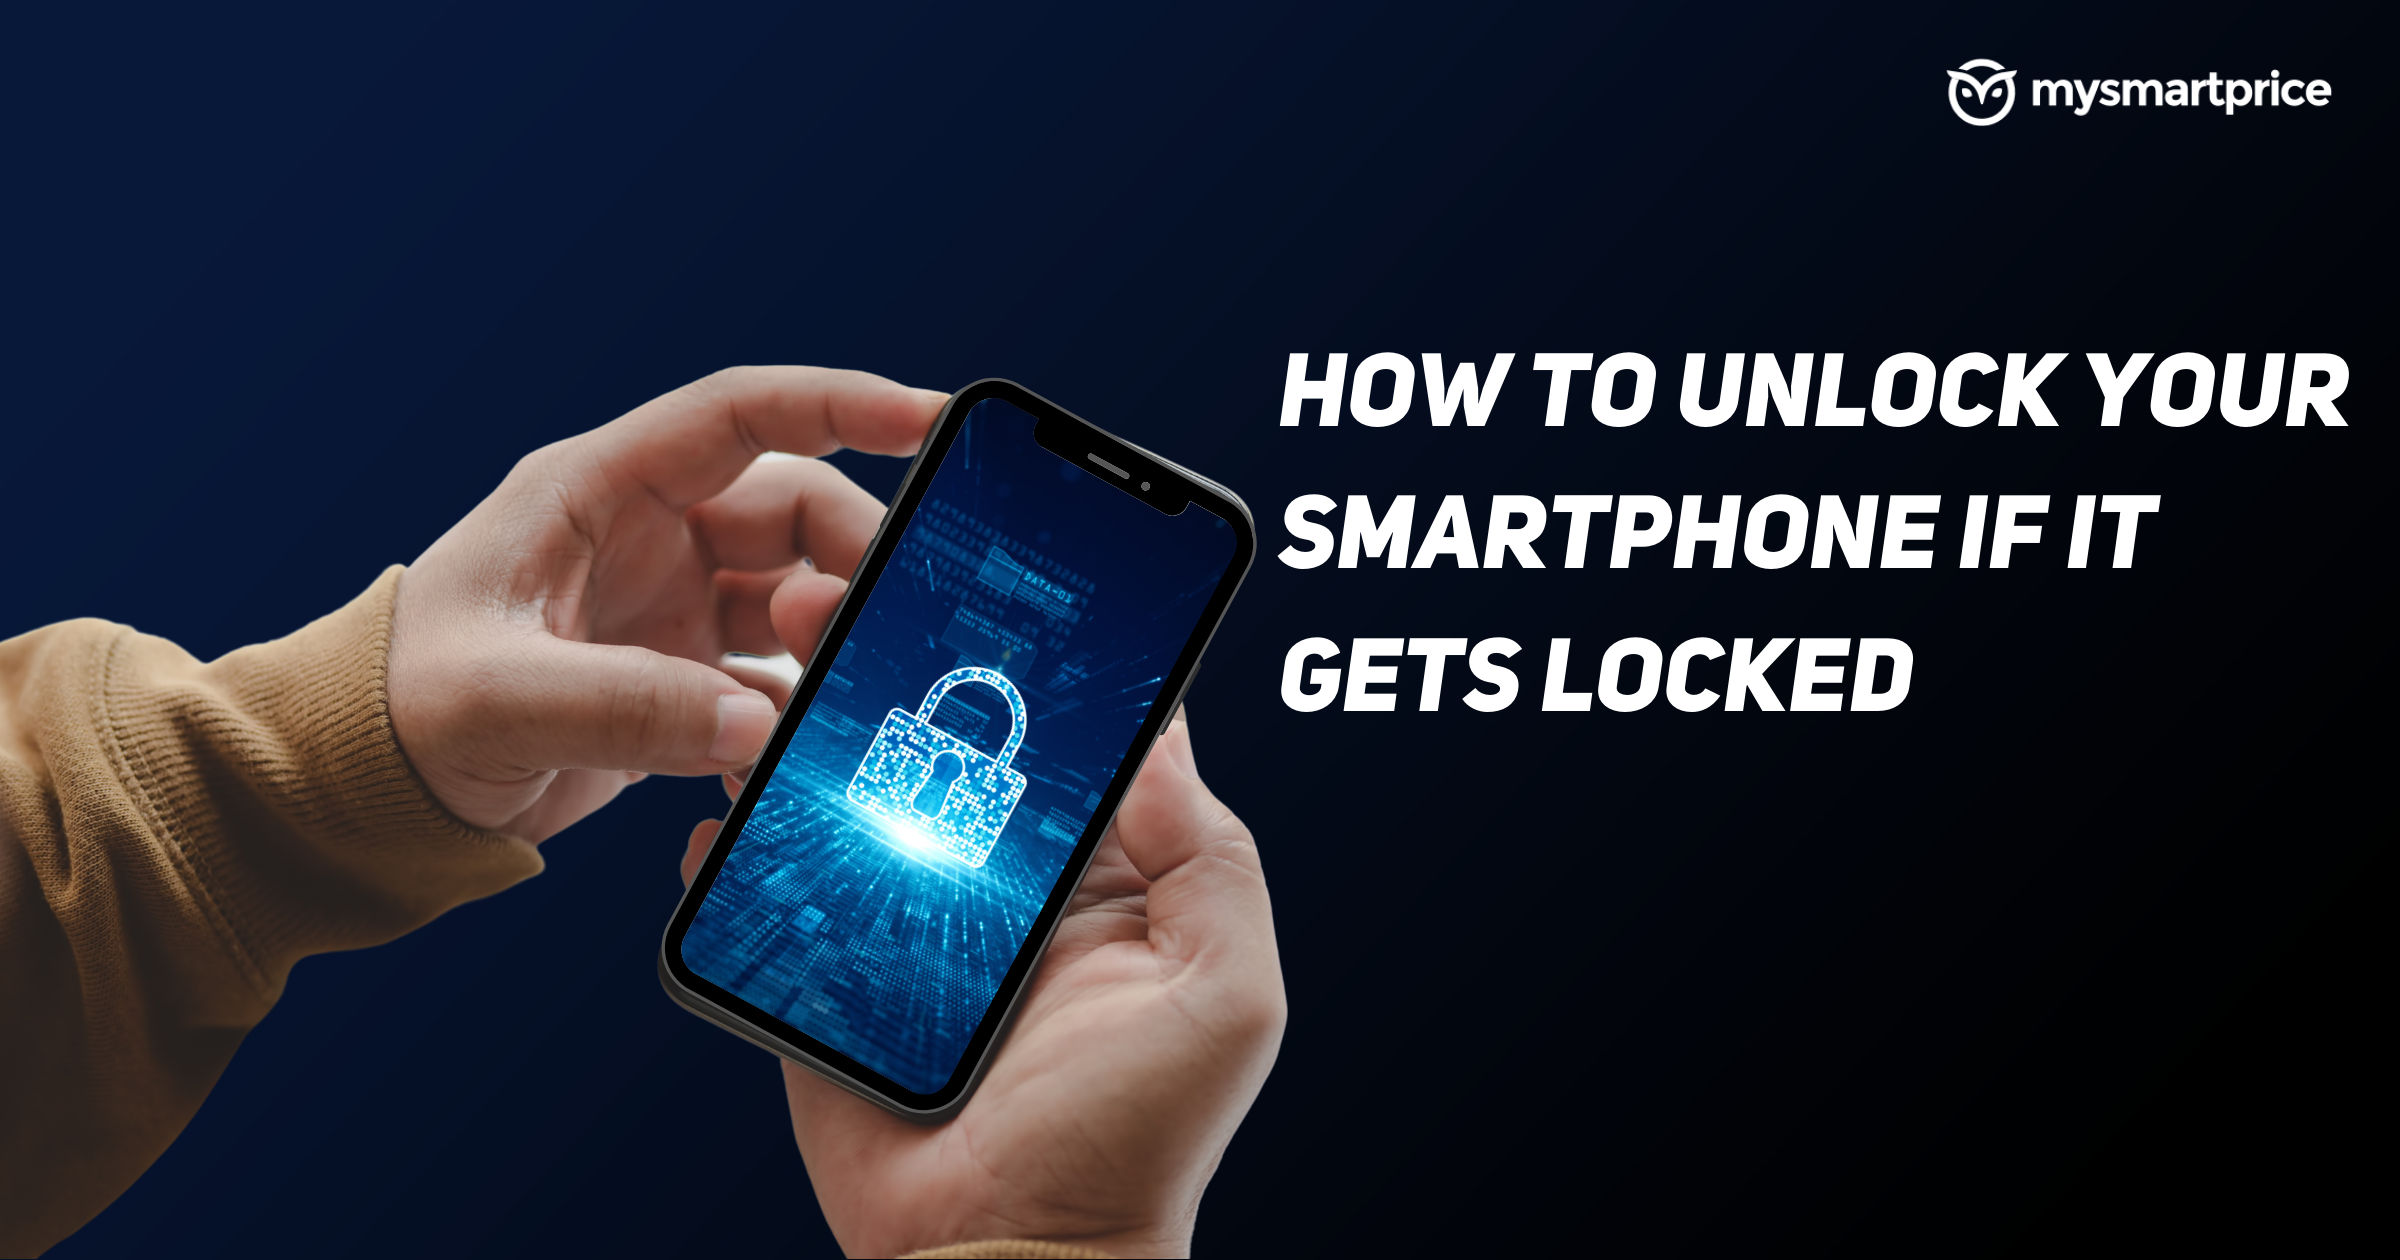 New rules: How to unlock your smartphone